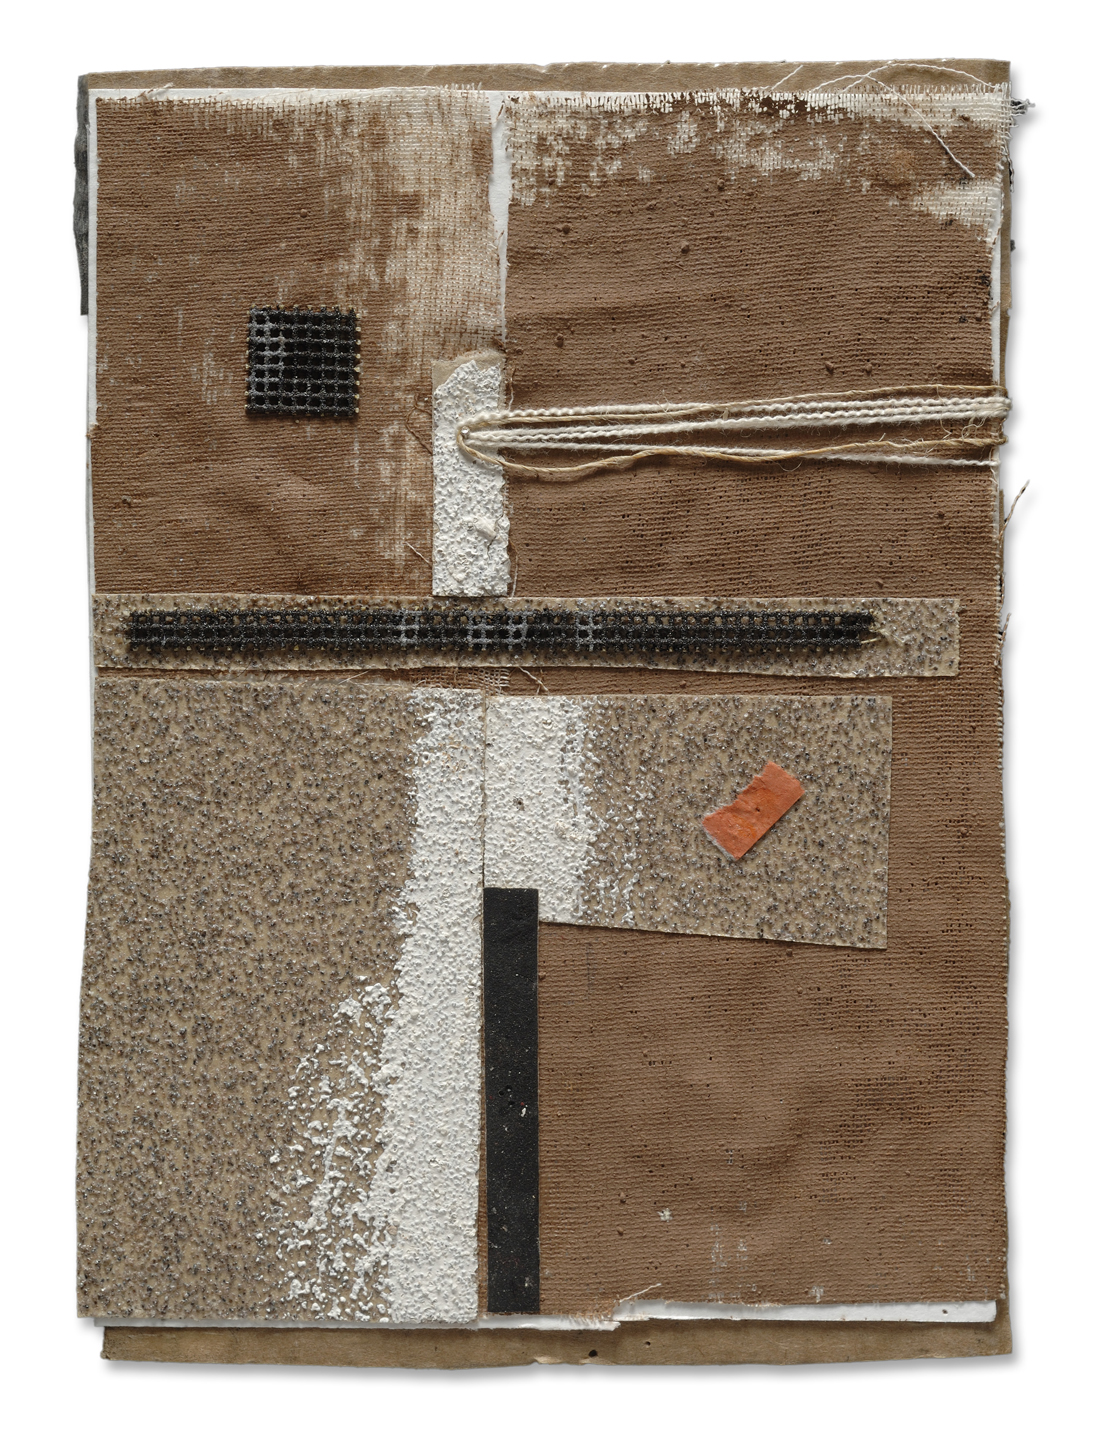 UNTITLED (TR671), 2015 canvas thread, cotton, hemp thread, cheese cloth, porcelain, black slip, oil pastel, metal pin, sand paper, paper, dry wall screen on corrugated board, 7 x 5 inches